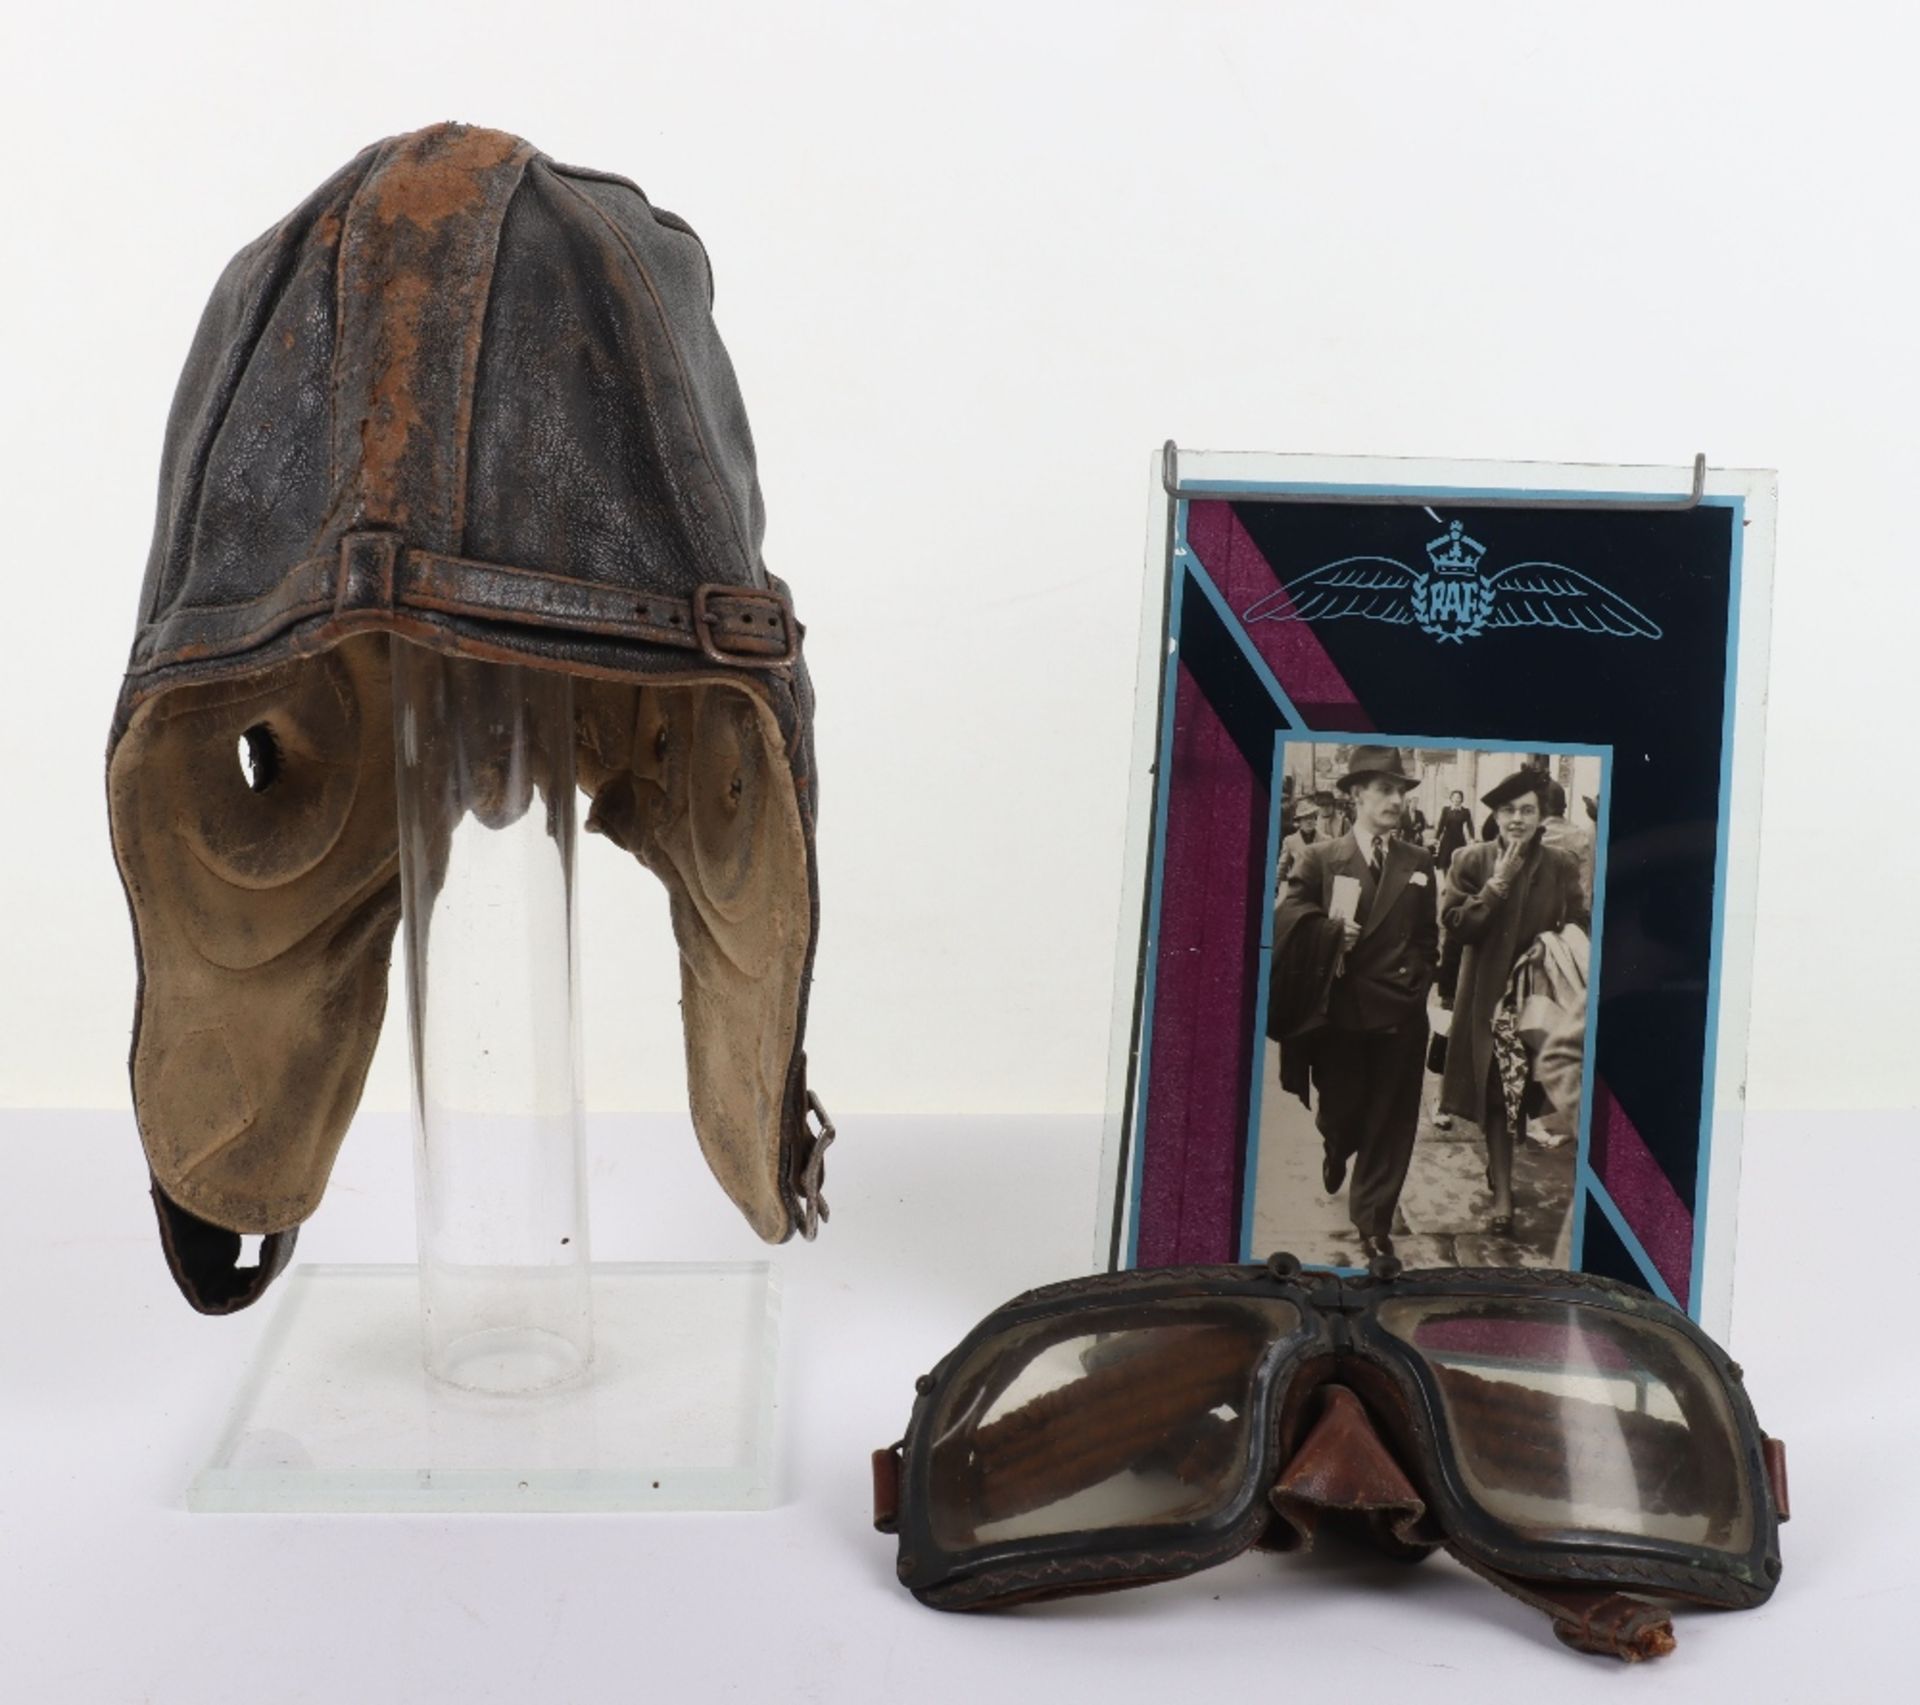 Historically Important Helmet and Flying Goggles owned by Flt.Lt J F Williams Executed After Being I